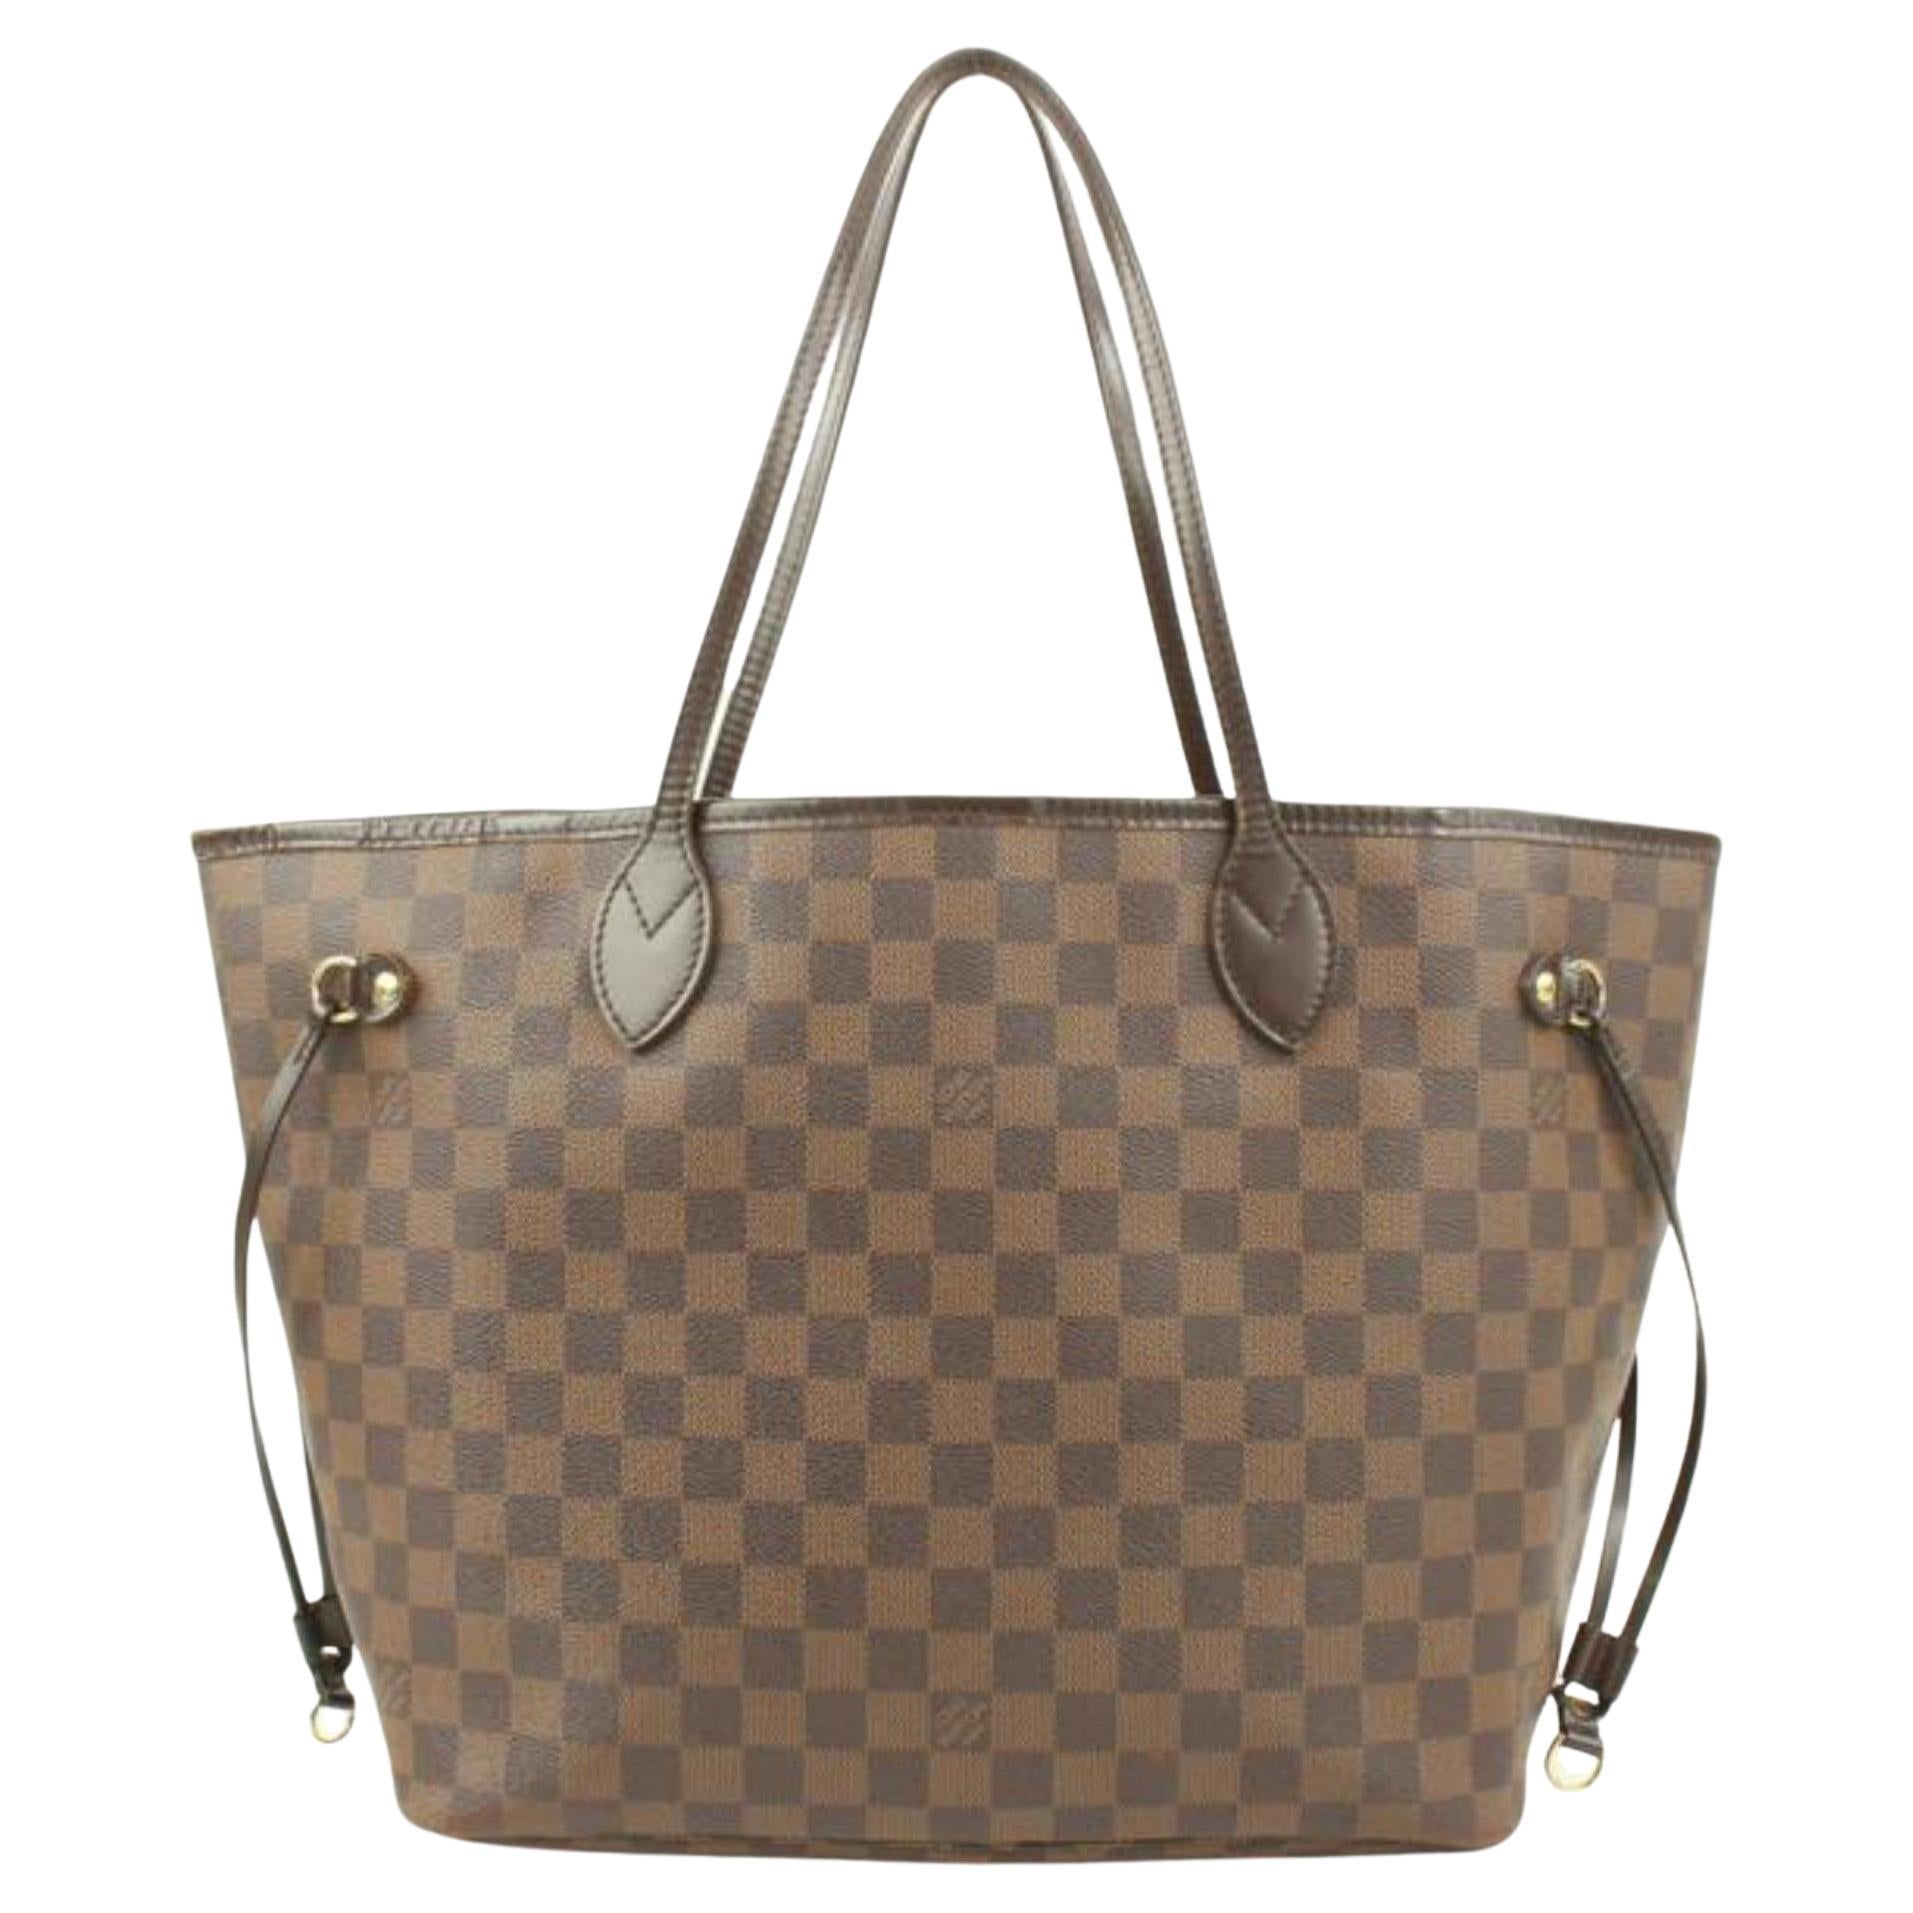 Louis Vuitton, Bags, New Hardly Used Lv Neverfull Damier Gm With Pouch Box  Dustbag Organizer